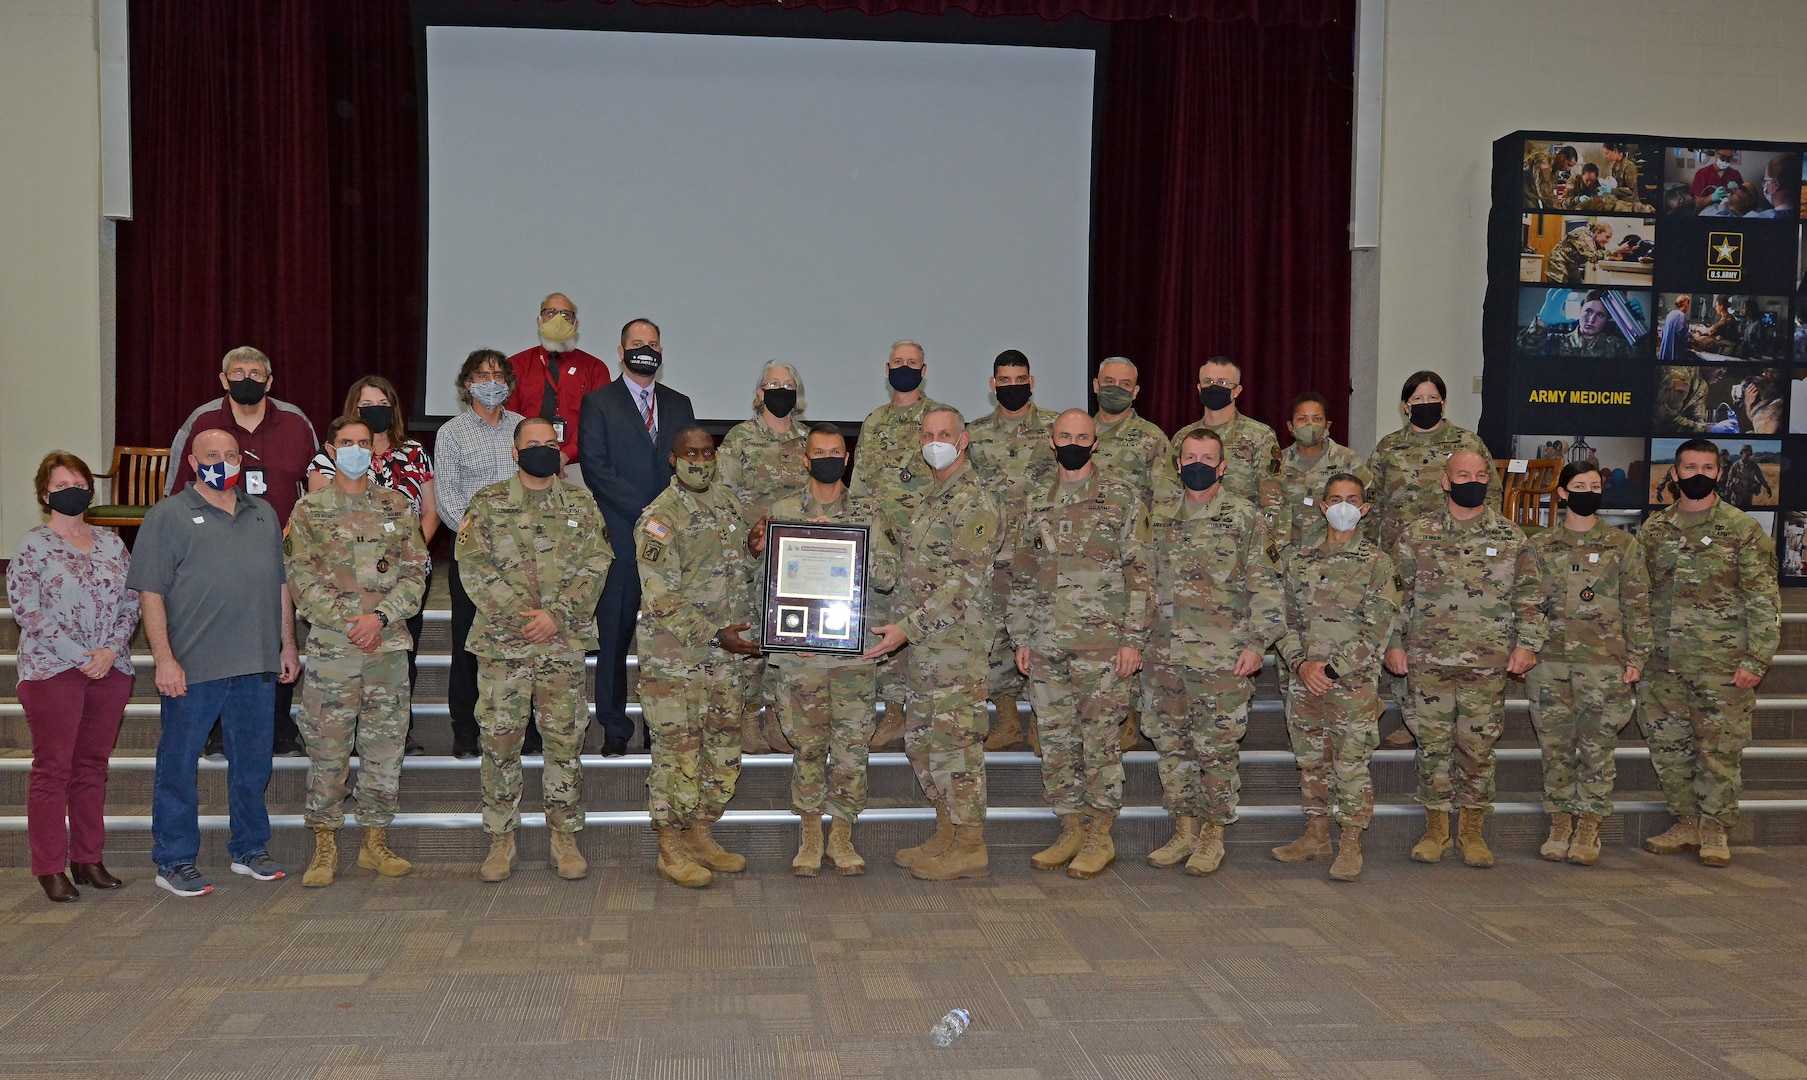 Lt. Gen. R. Scott Dingle, Surgeon General of the U.S. Army and commanding general, U.S. Army Medical Command; Maj. Johnny Paul, Department Chair, Combat Medic Specialist Training Program; and Maj. Gen. Dennis P. LeMaster, U.S. Army Medical Center of Excellence commander; pose for a group photo during the Third Quarter Fiscal Year 2020 Army Medicine Wolf Pack Award ceremony Nov. 9 at the Blesse Auditorium at Joint Base San Antonio-Fort Sam Houston.